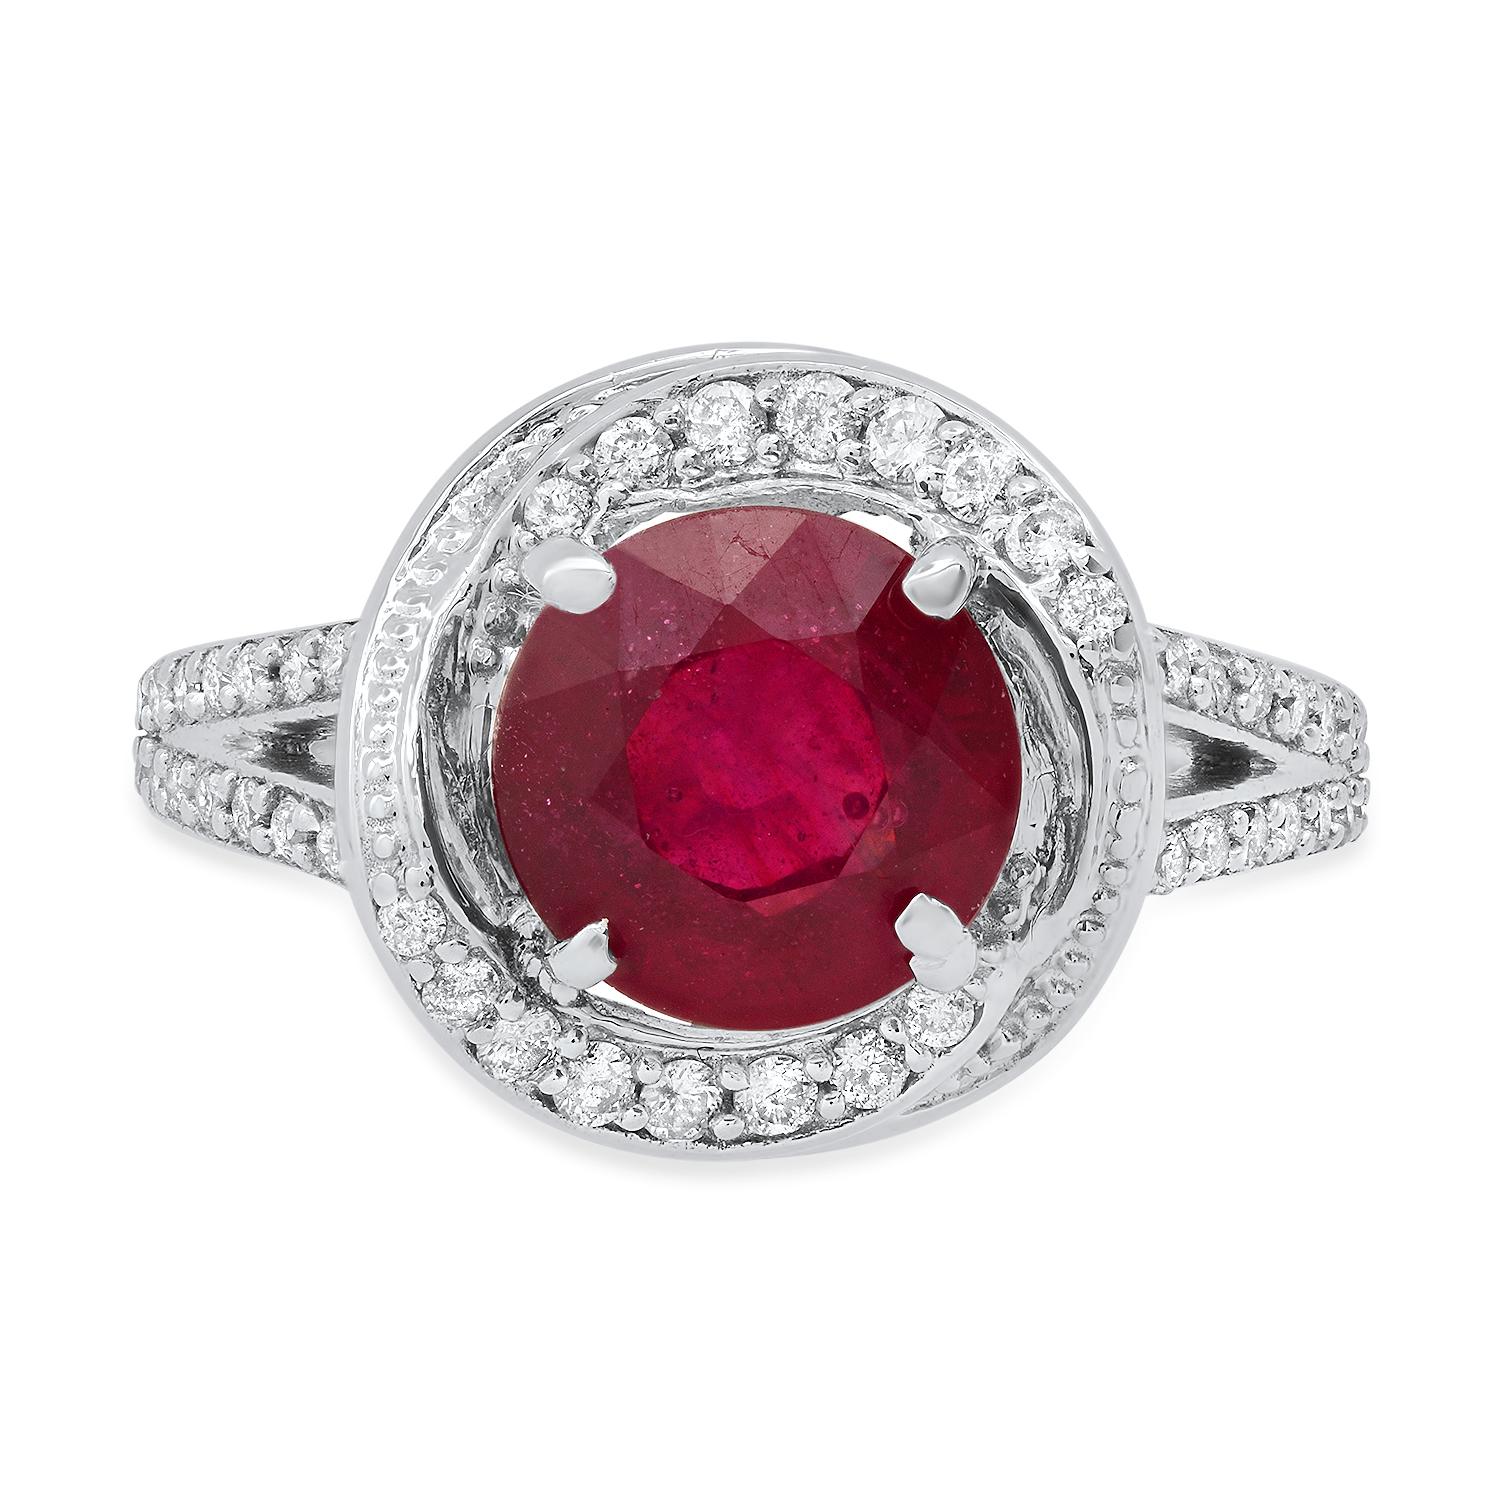 14K White Gold Setting with 2.55ct Ruby and 0.60ct Diamond Ladies Ring